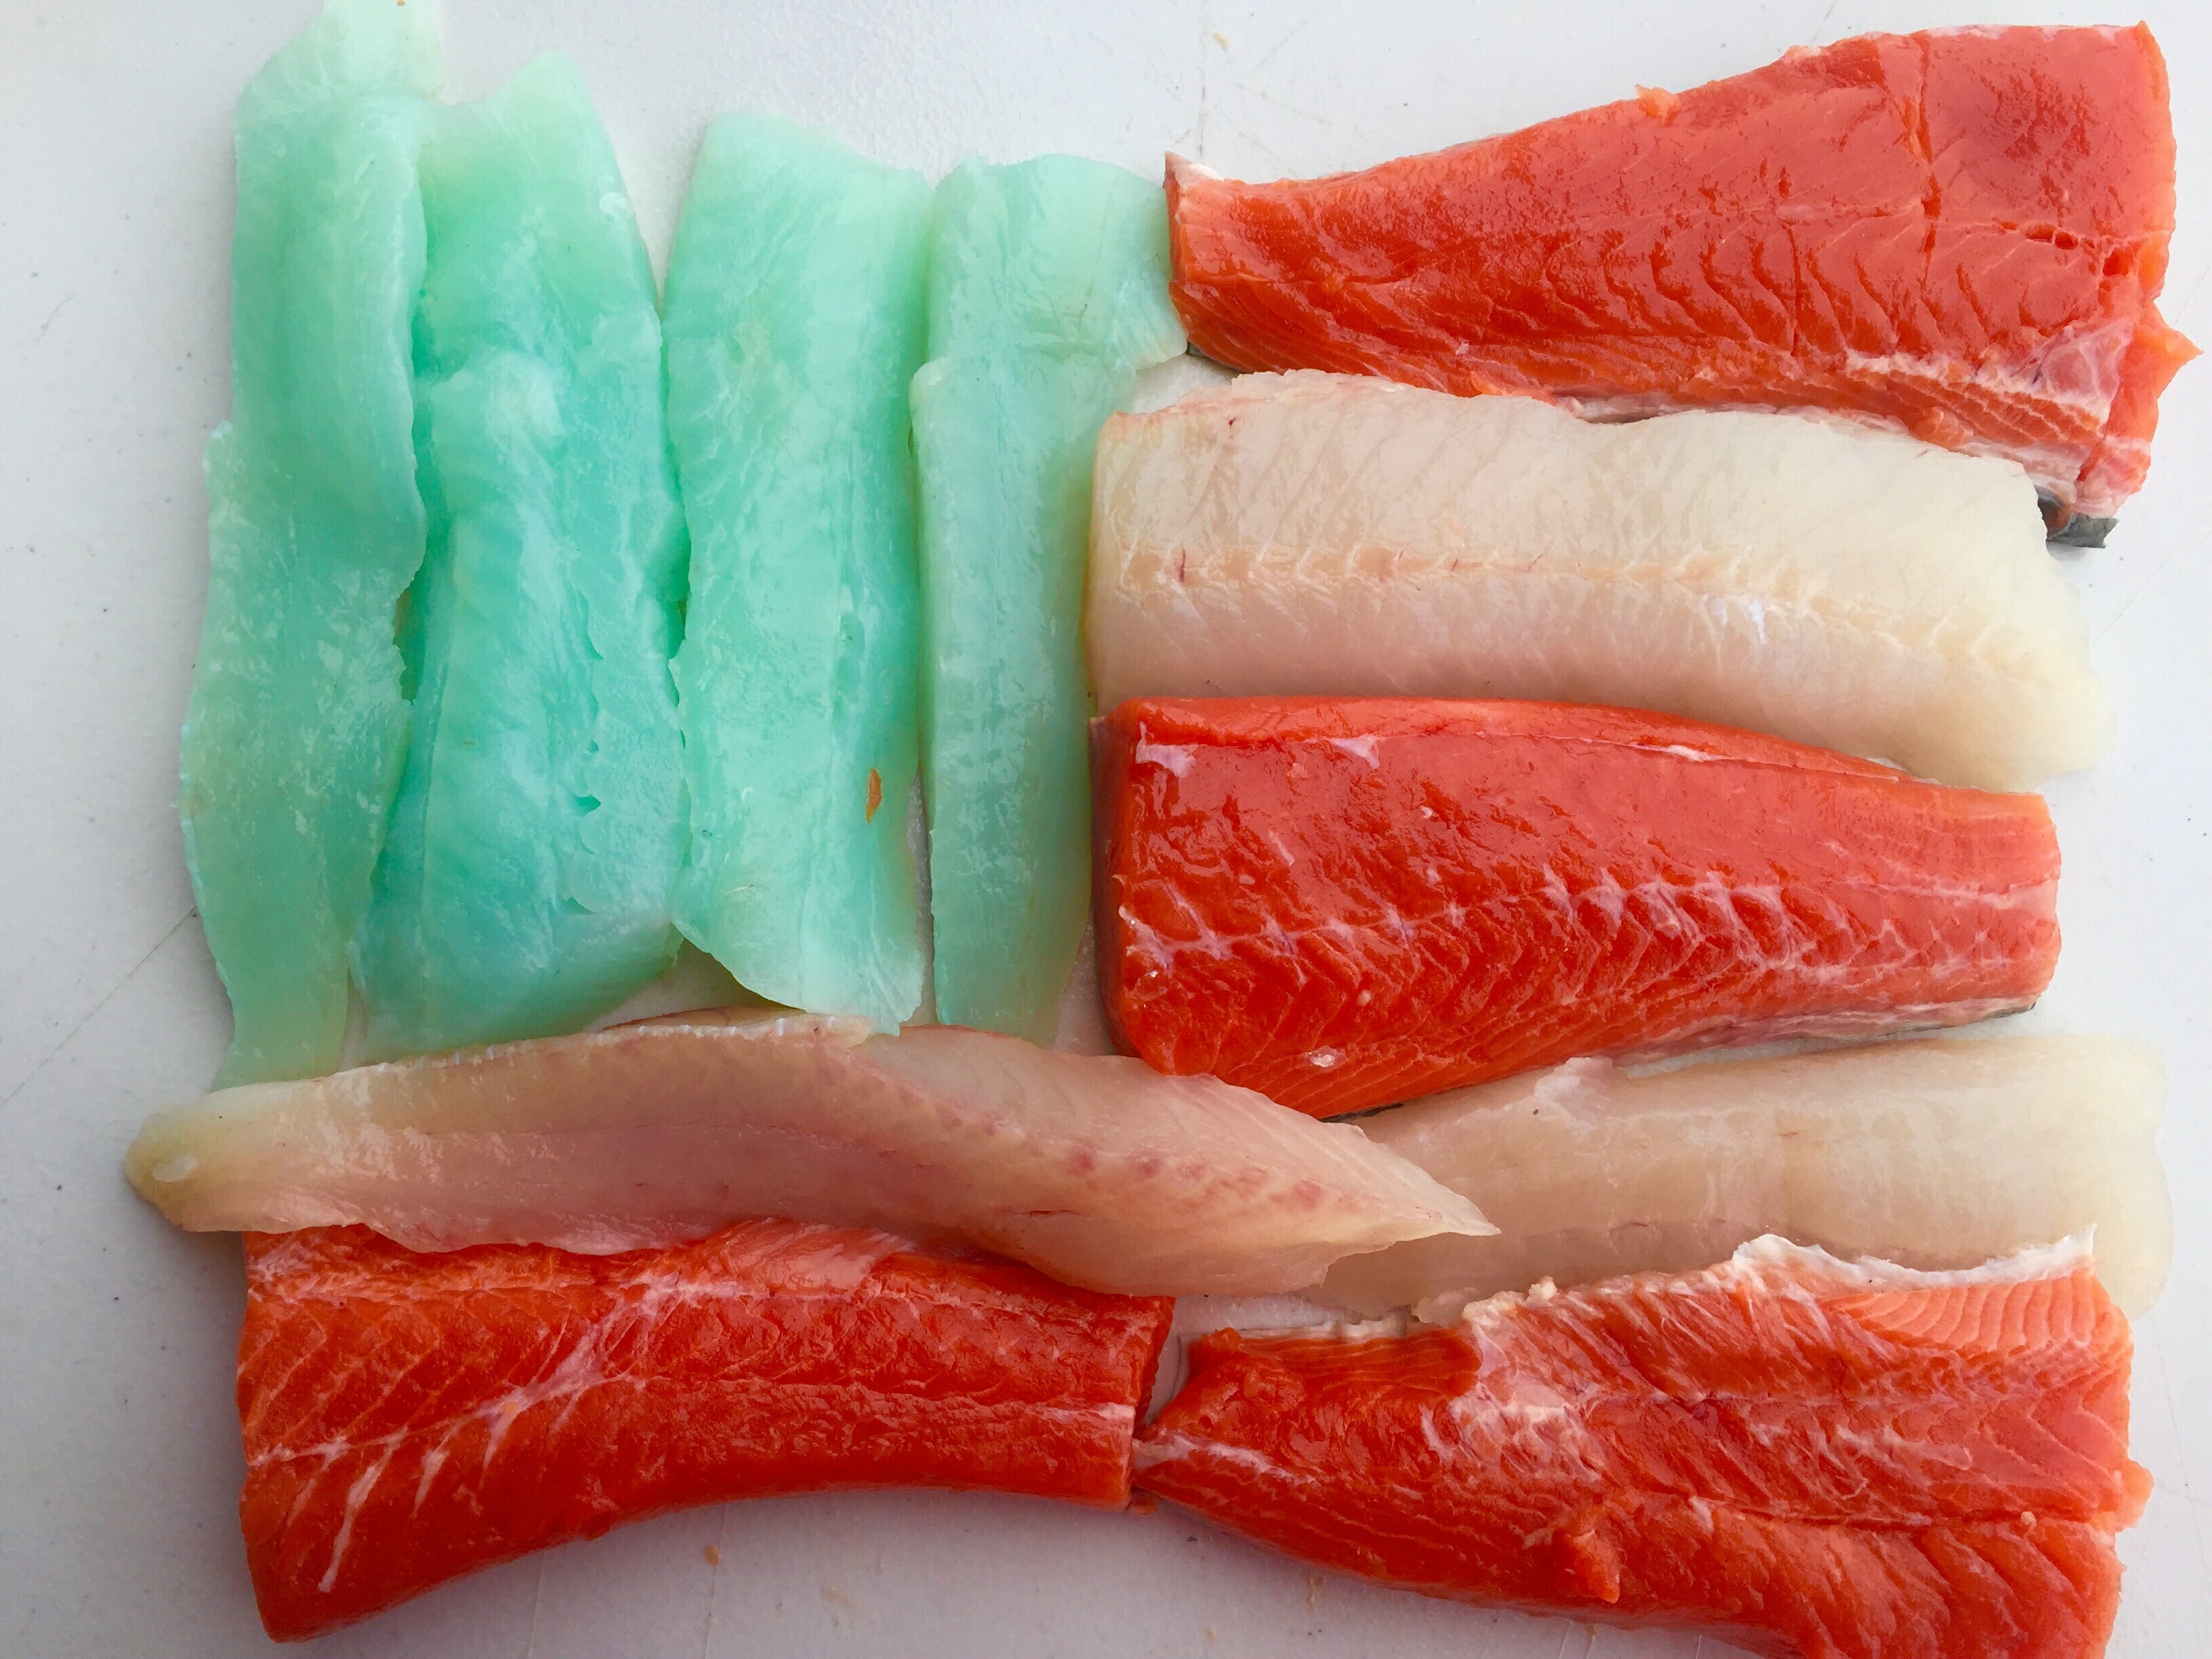 Red Fish, Blue Fish…what's up with all the different colors of fish flesh?